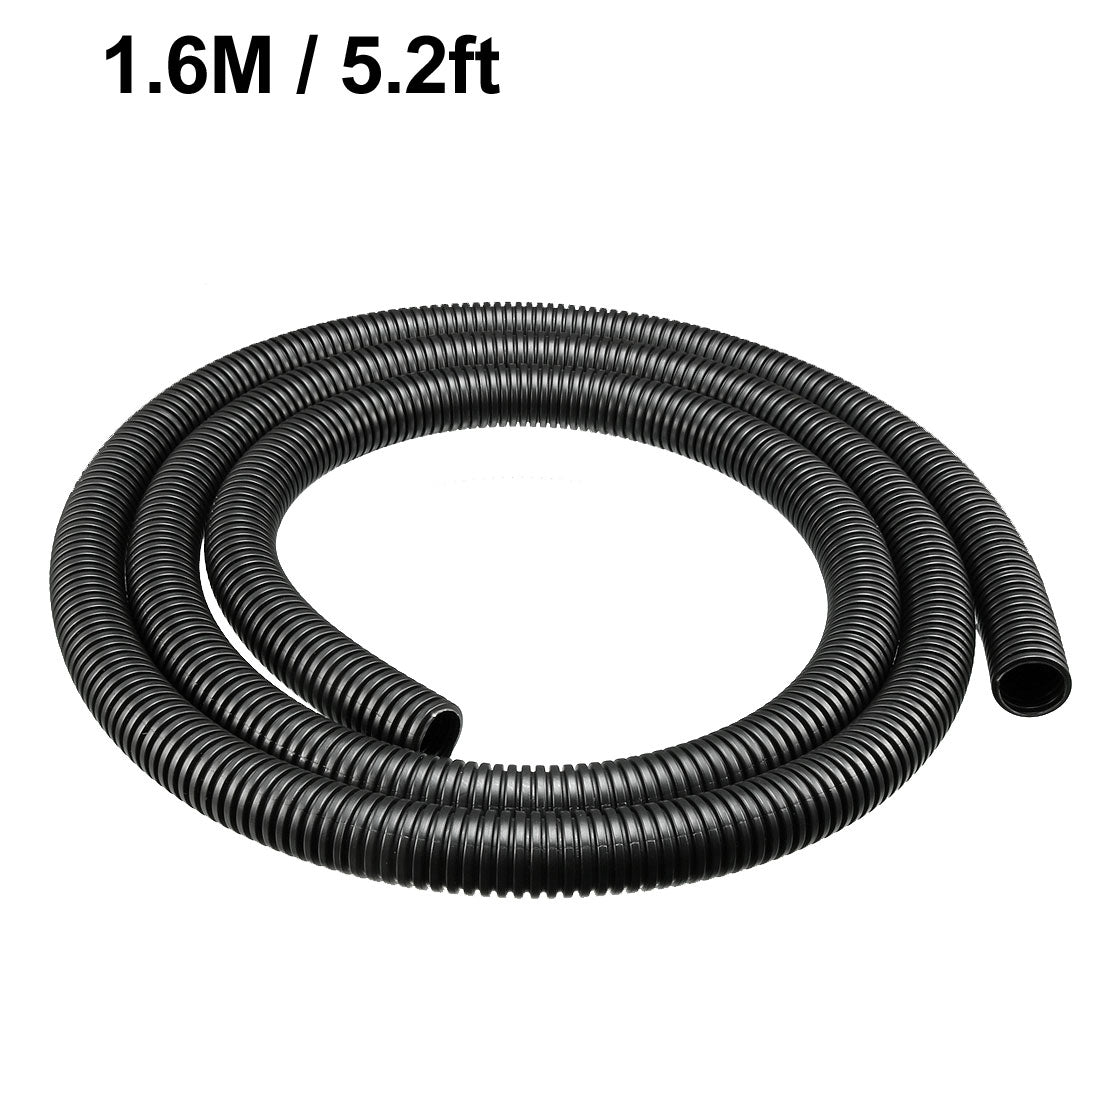 uxcell Uxcell 1.6 M 17 x 21.2 mm PP Flexible Corrugated Conduit Tube for Garden,Office Black